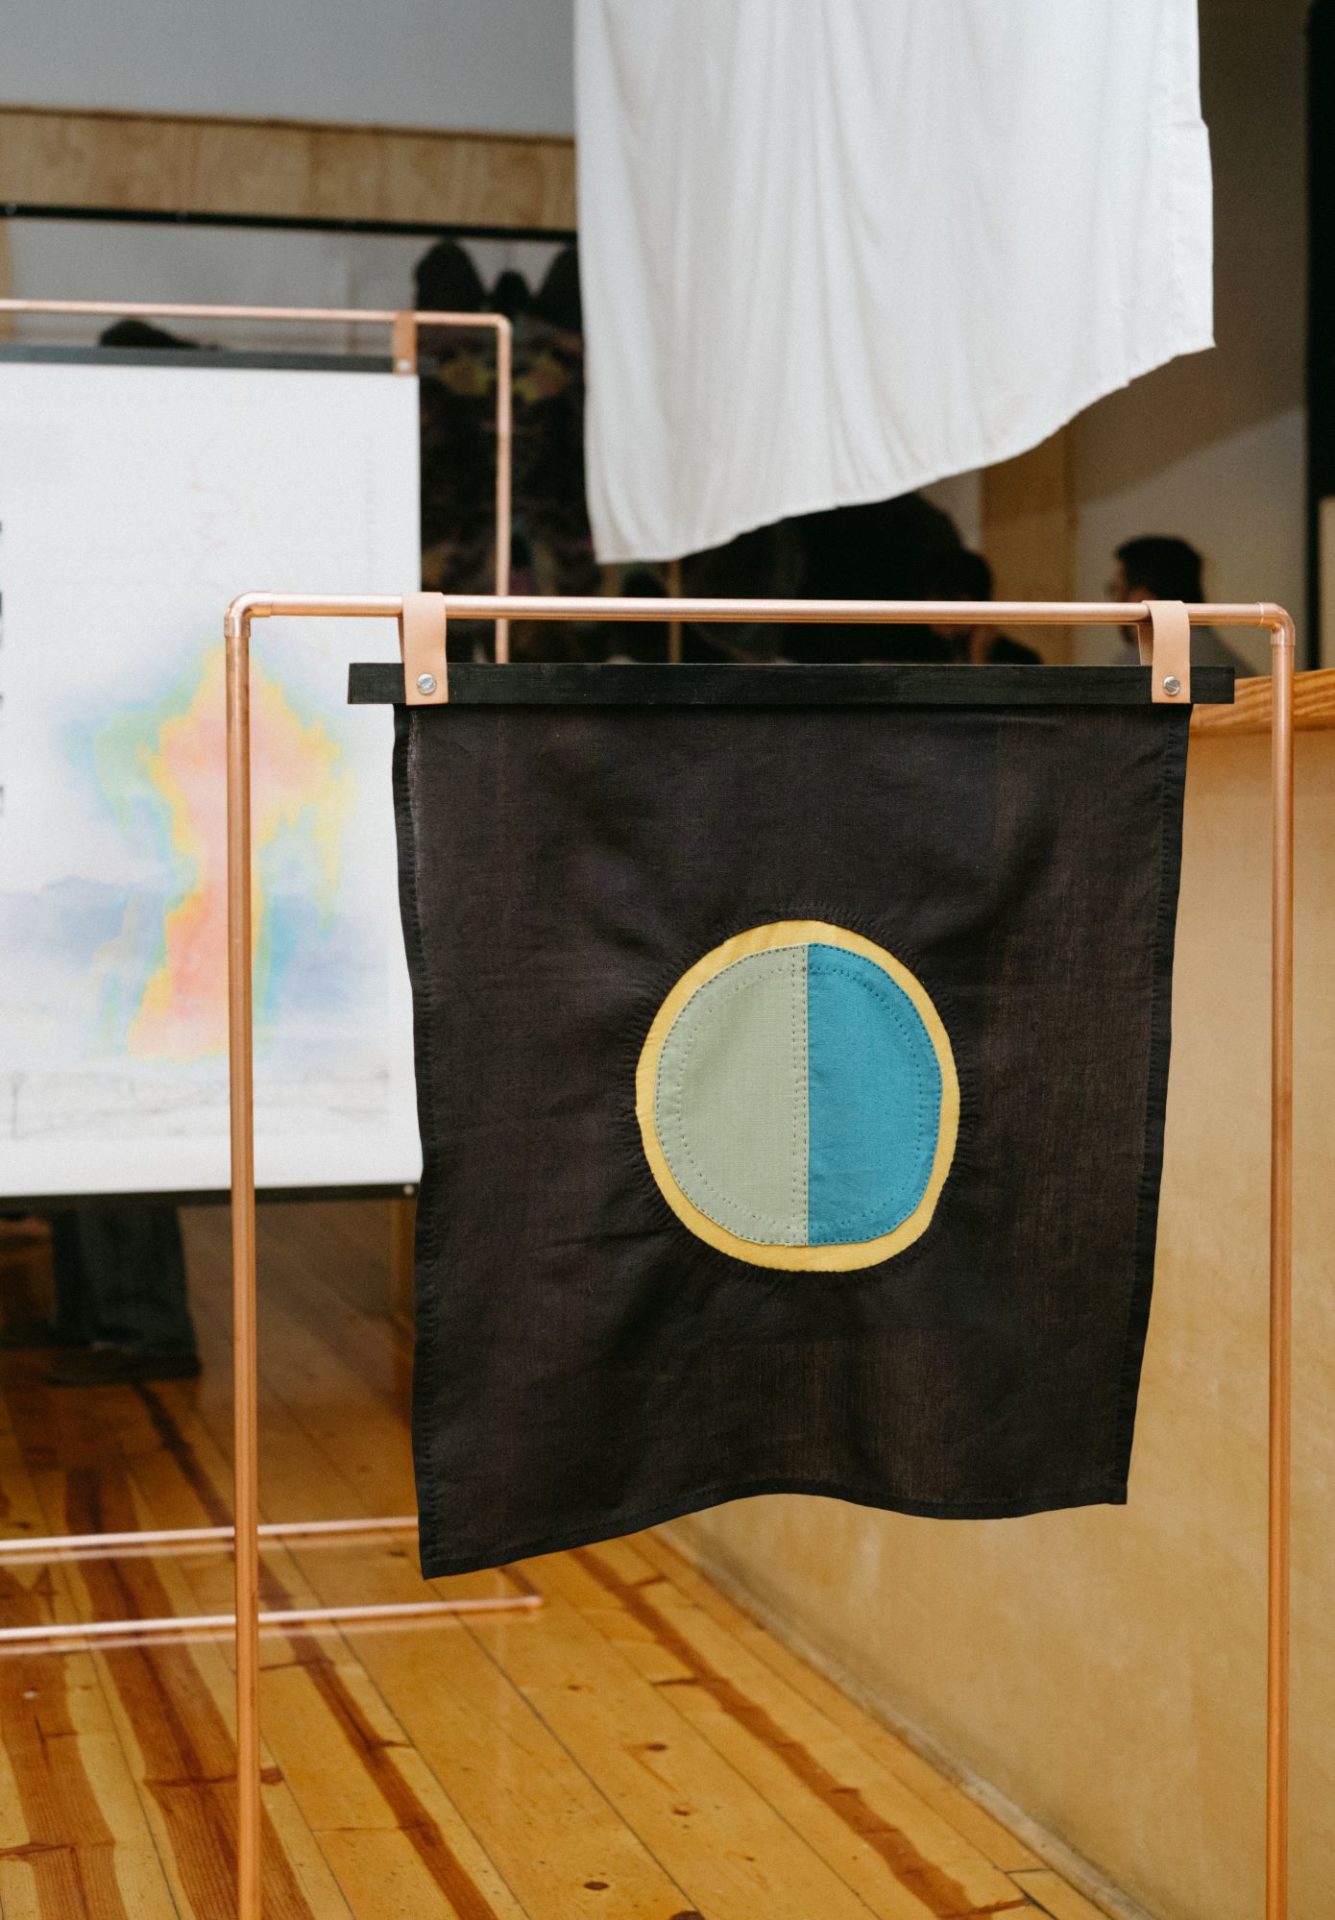 A circle that is half taupe and half teal with a gold border is stitched onto a rectangular black piece of fabric. The fabric is hanging on a frame made of copper tubing.